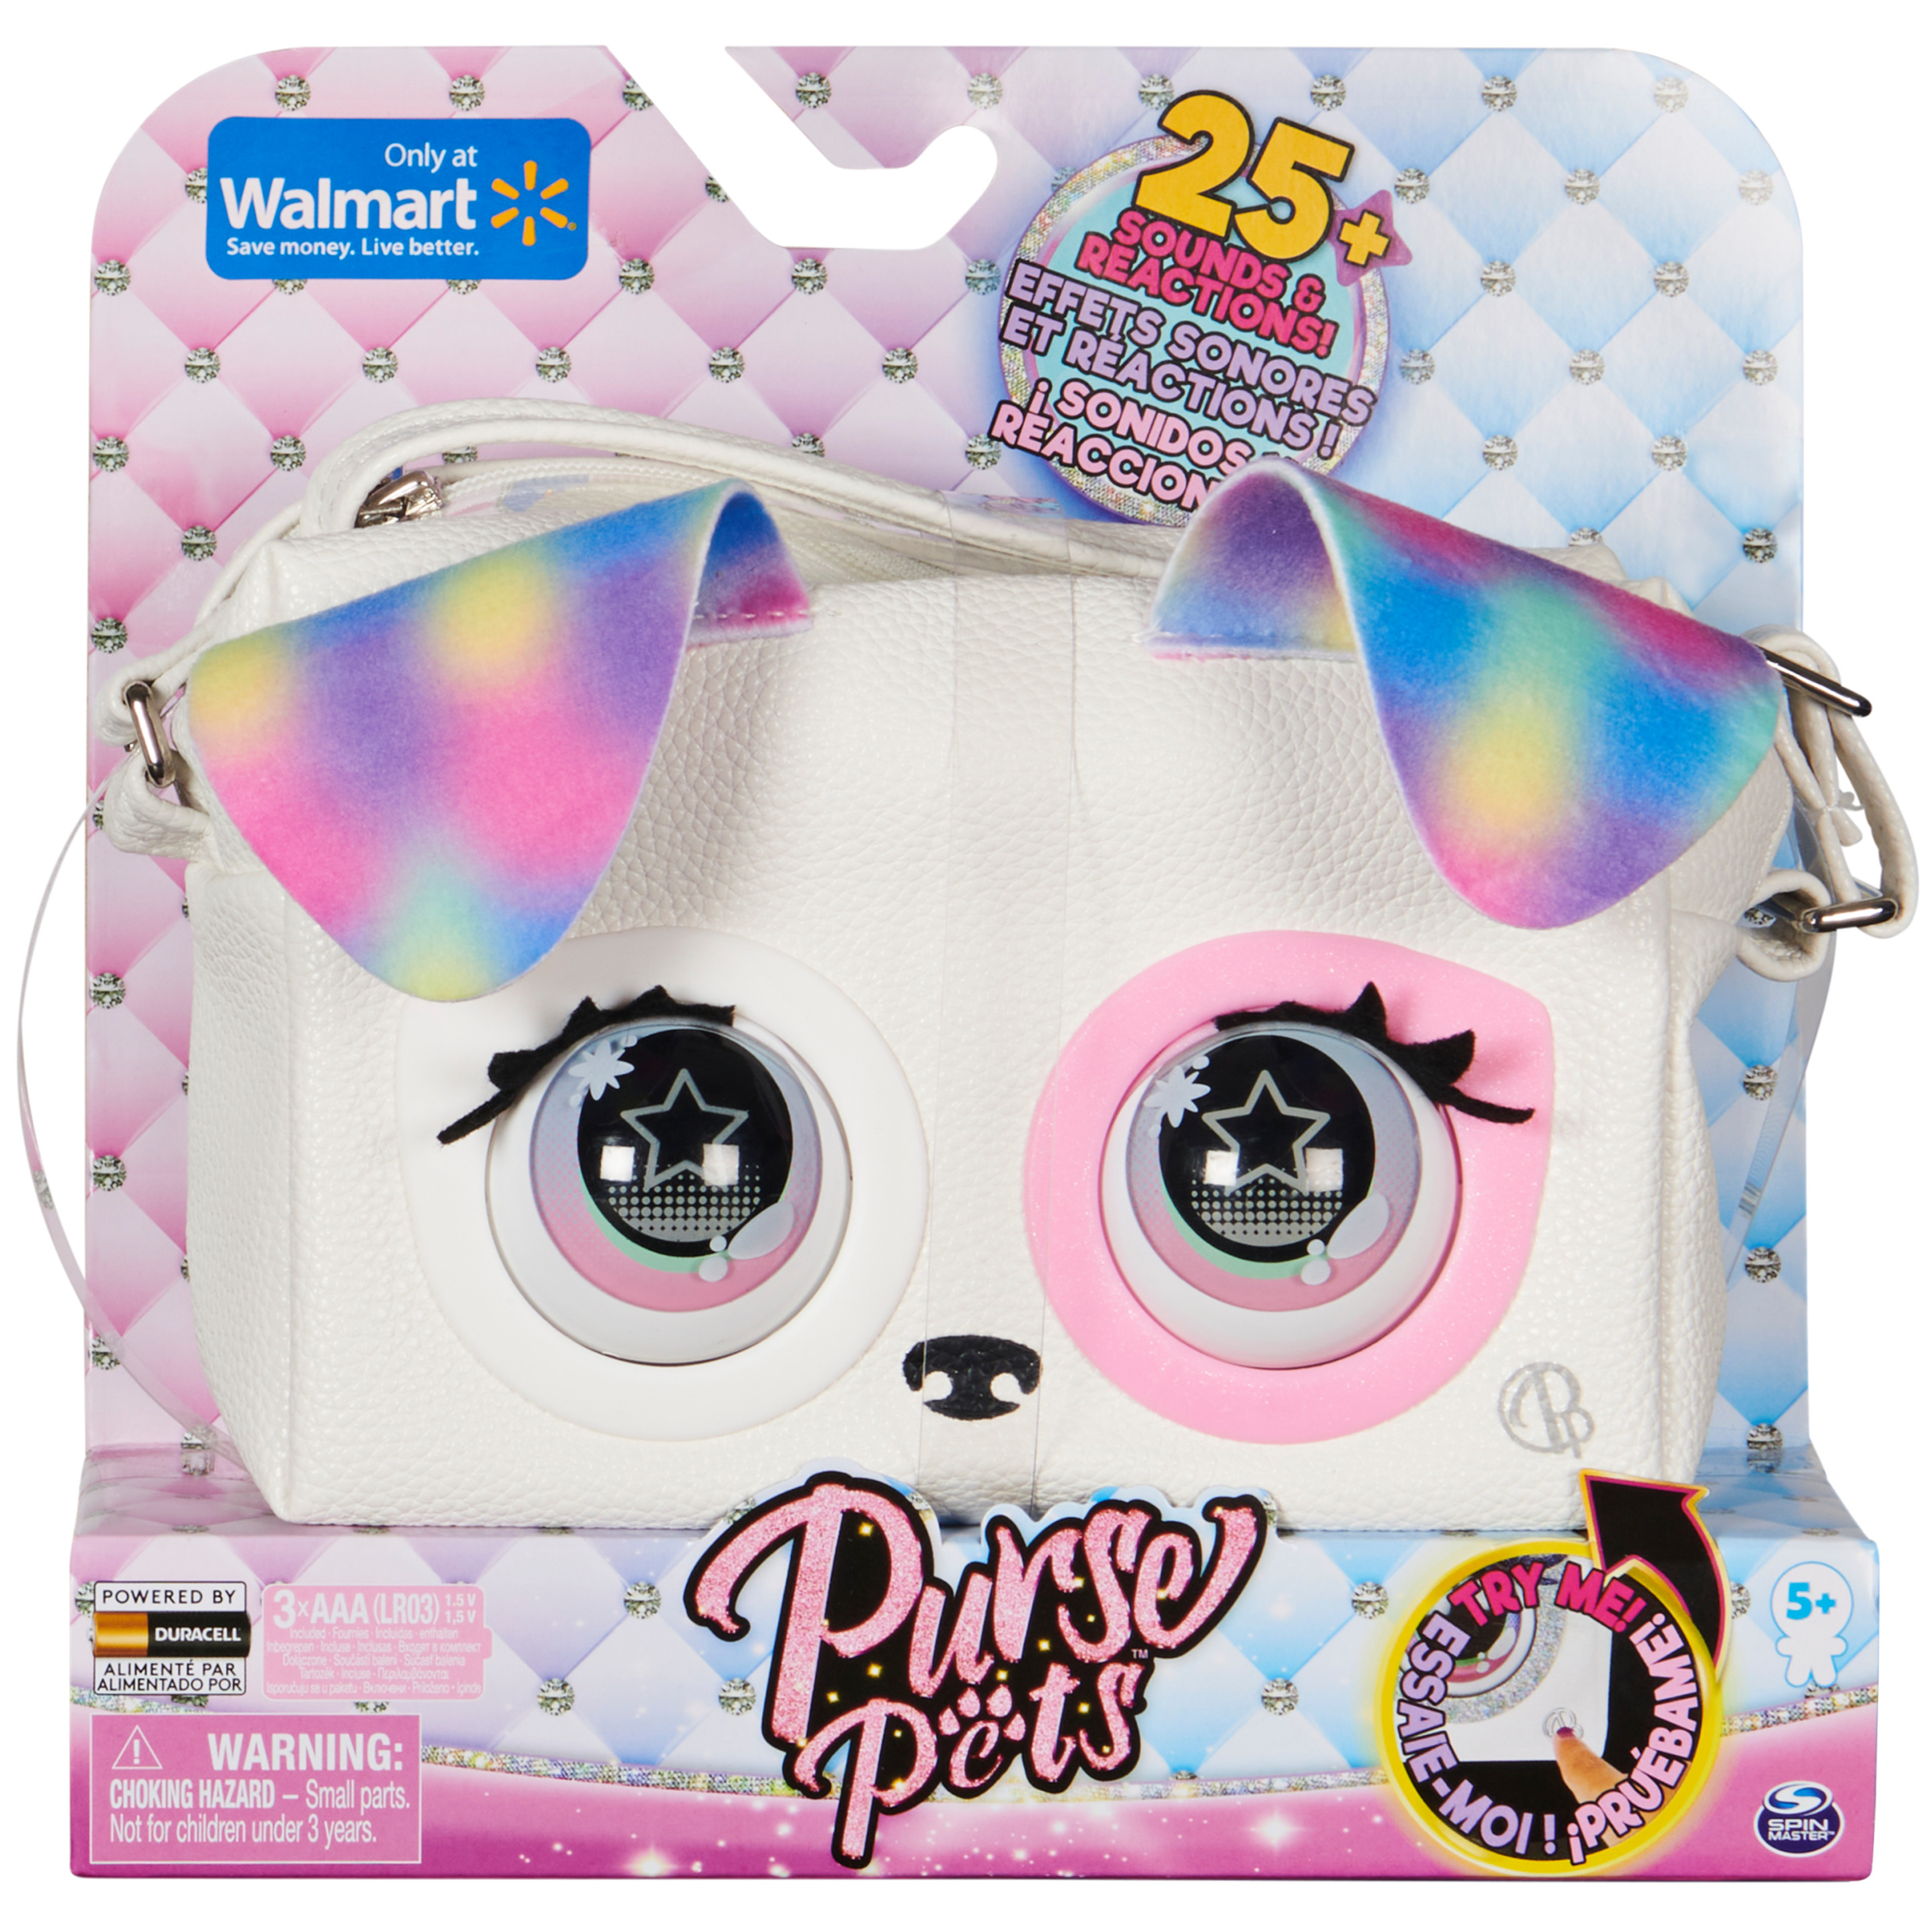 Purse Pets Rainbow Pup, Over 25 Sounds & Reactions (Walmart Exclusive) - image 1 of 11